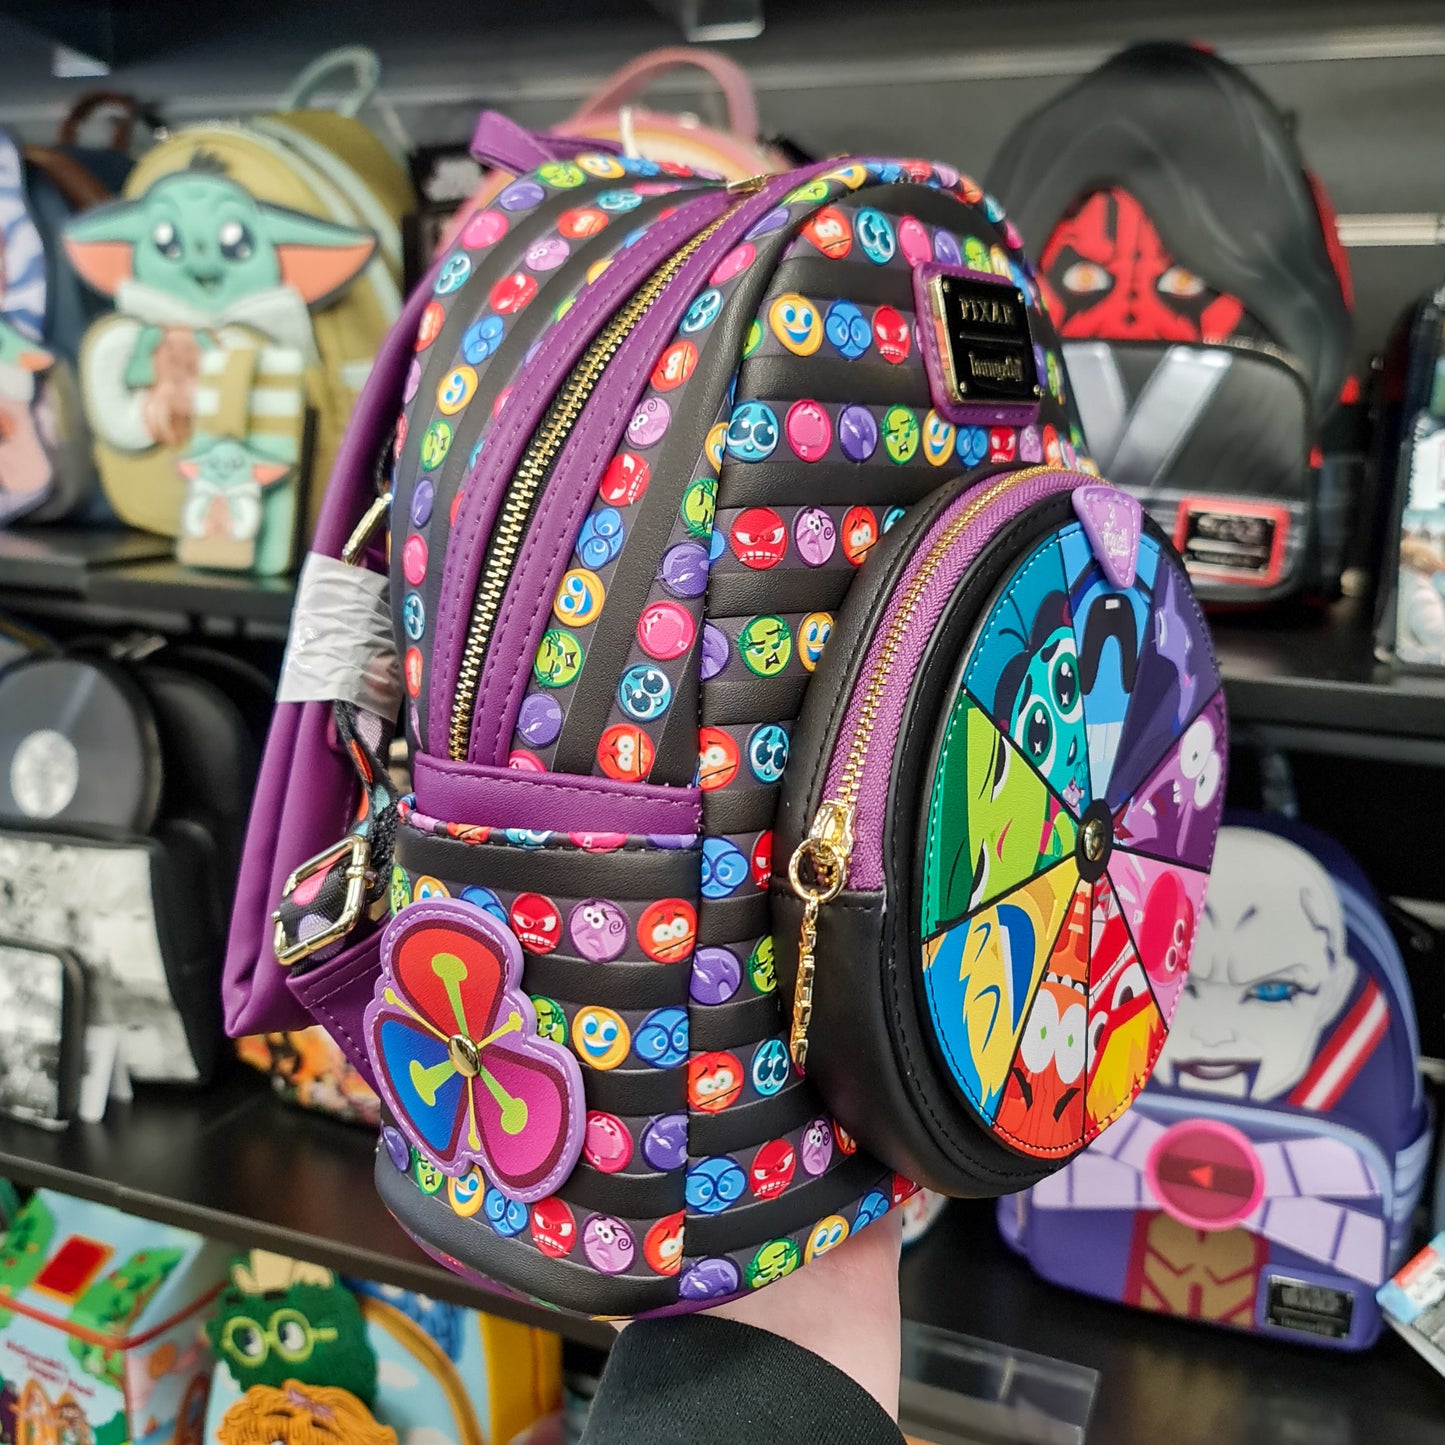 INSIDE OUT 2 CORE MEMORIES MINI BACKPACK